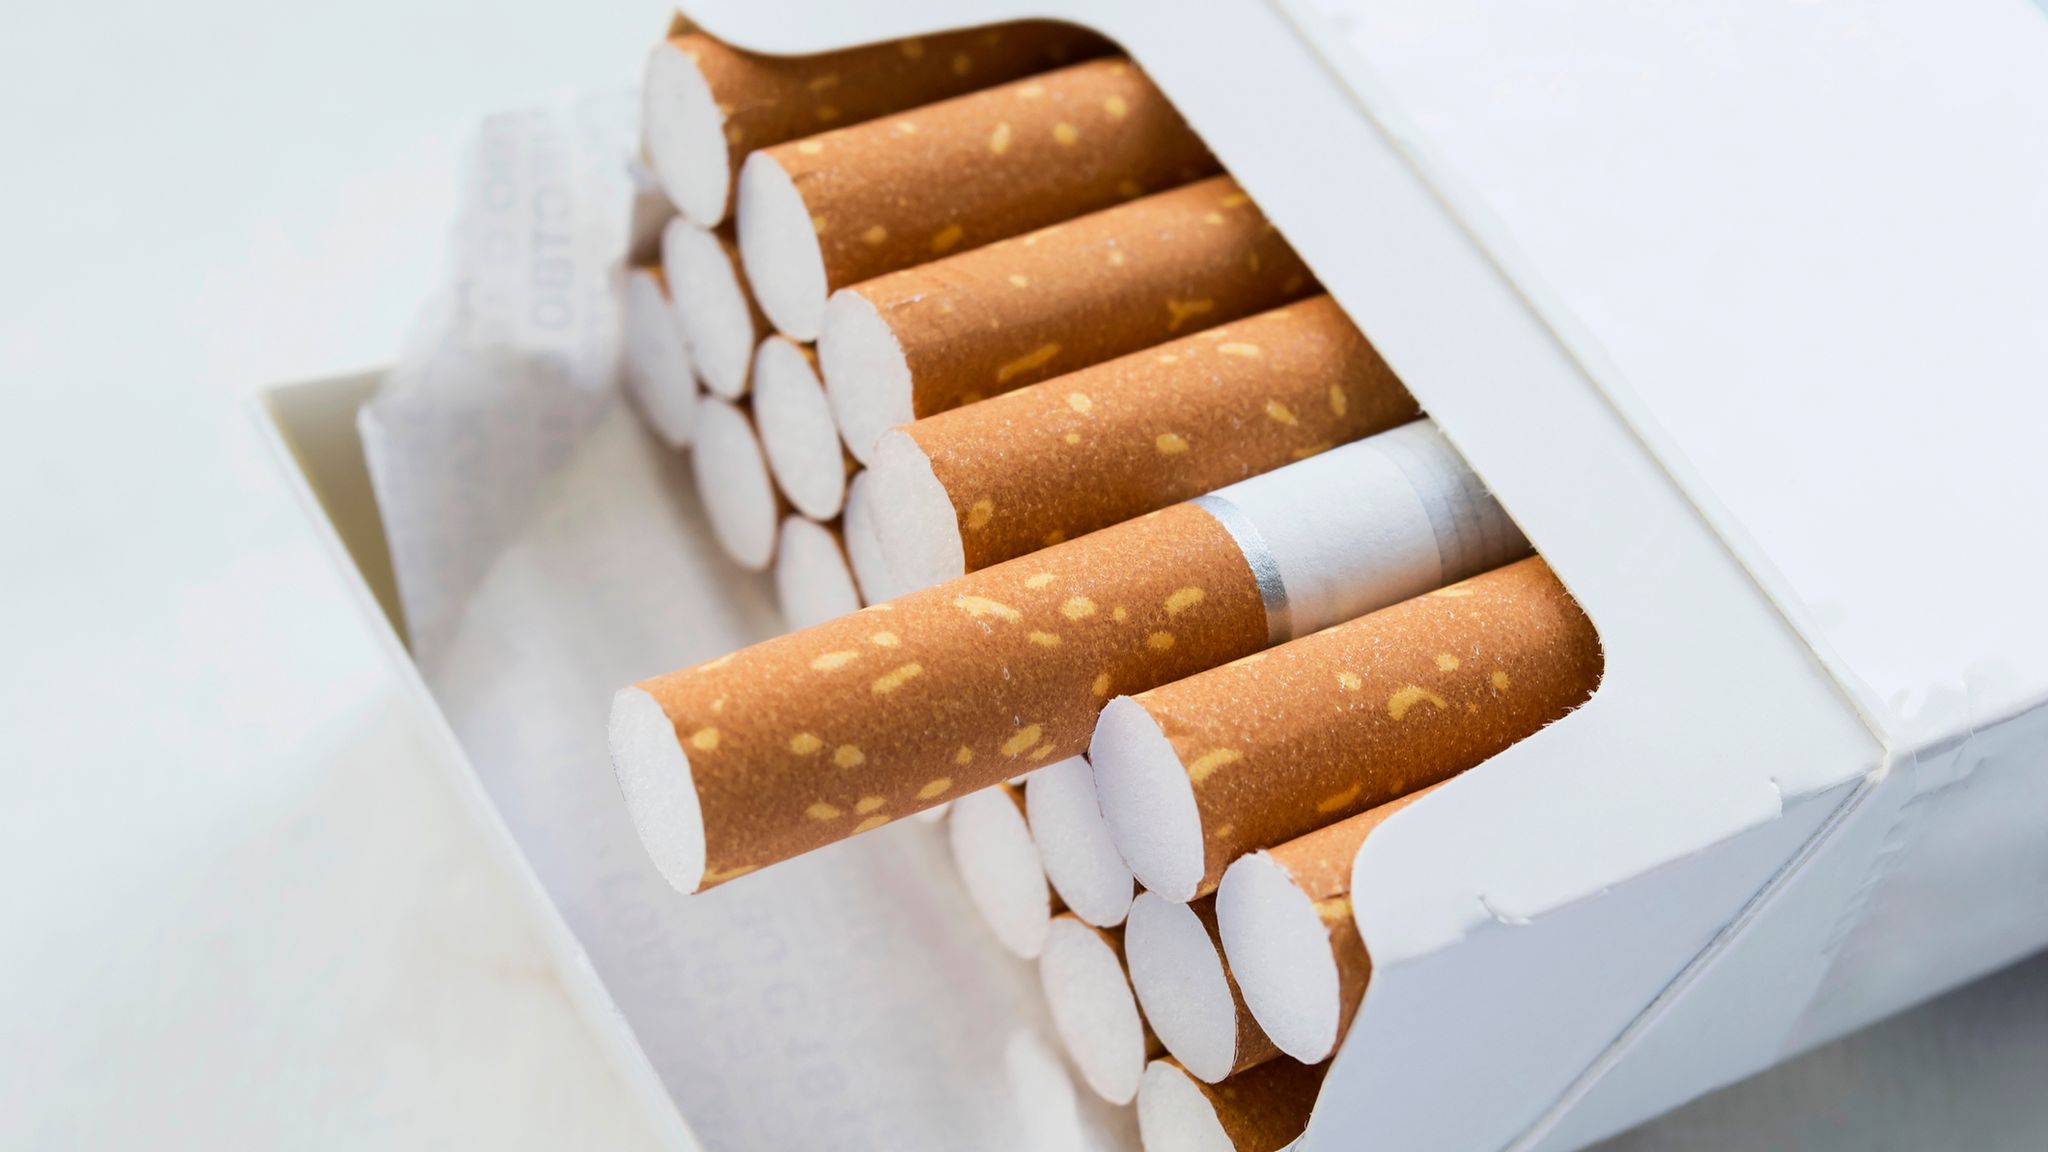 Tobacco giant Imperial Brands rethinks CEO's pay rise after revolt, Executive pay and bonuses